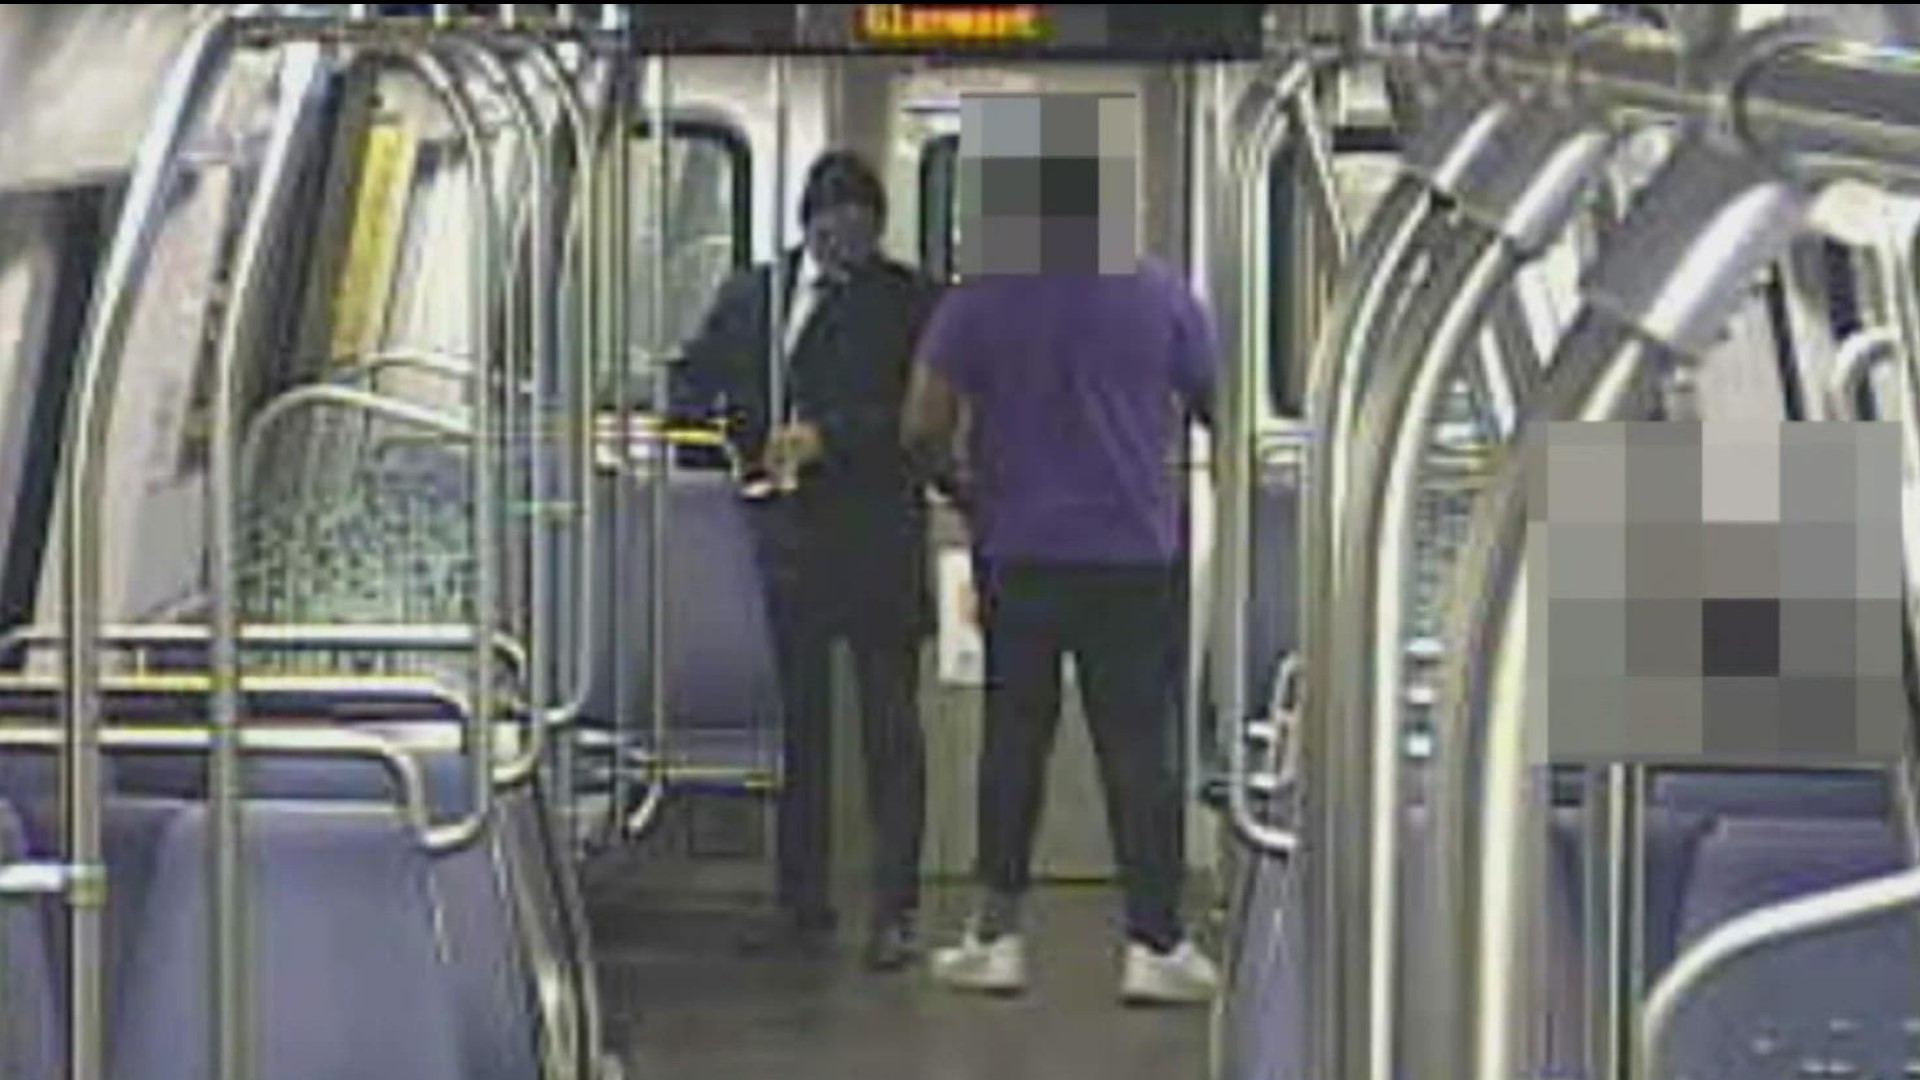 The ongoing trial is revealing new details in an alleged attempted murder on a Red Line train at the heart of a years-long investigation.